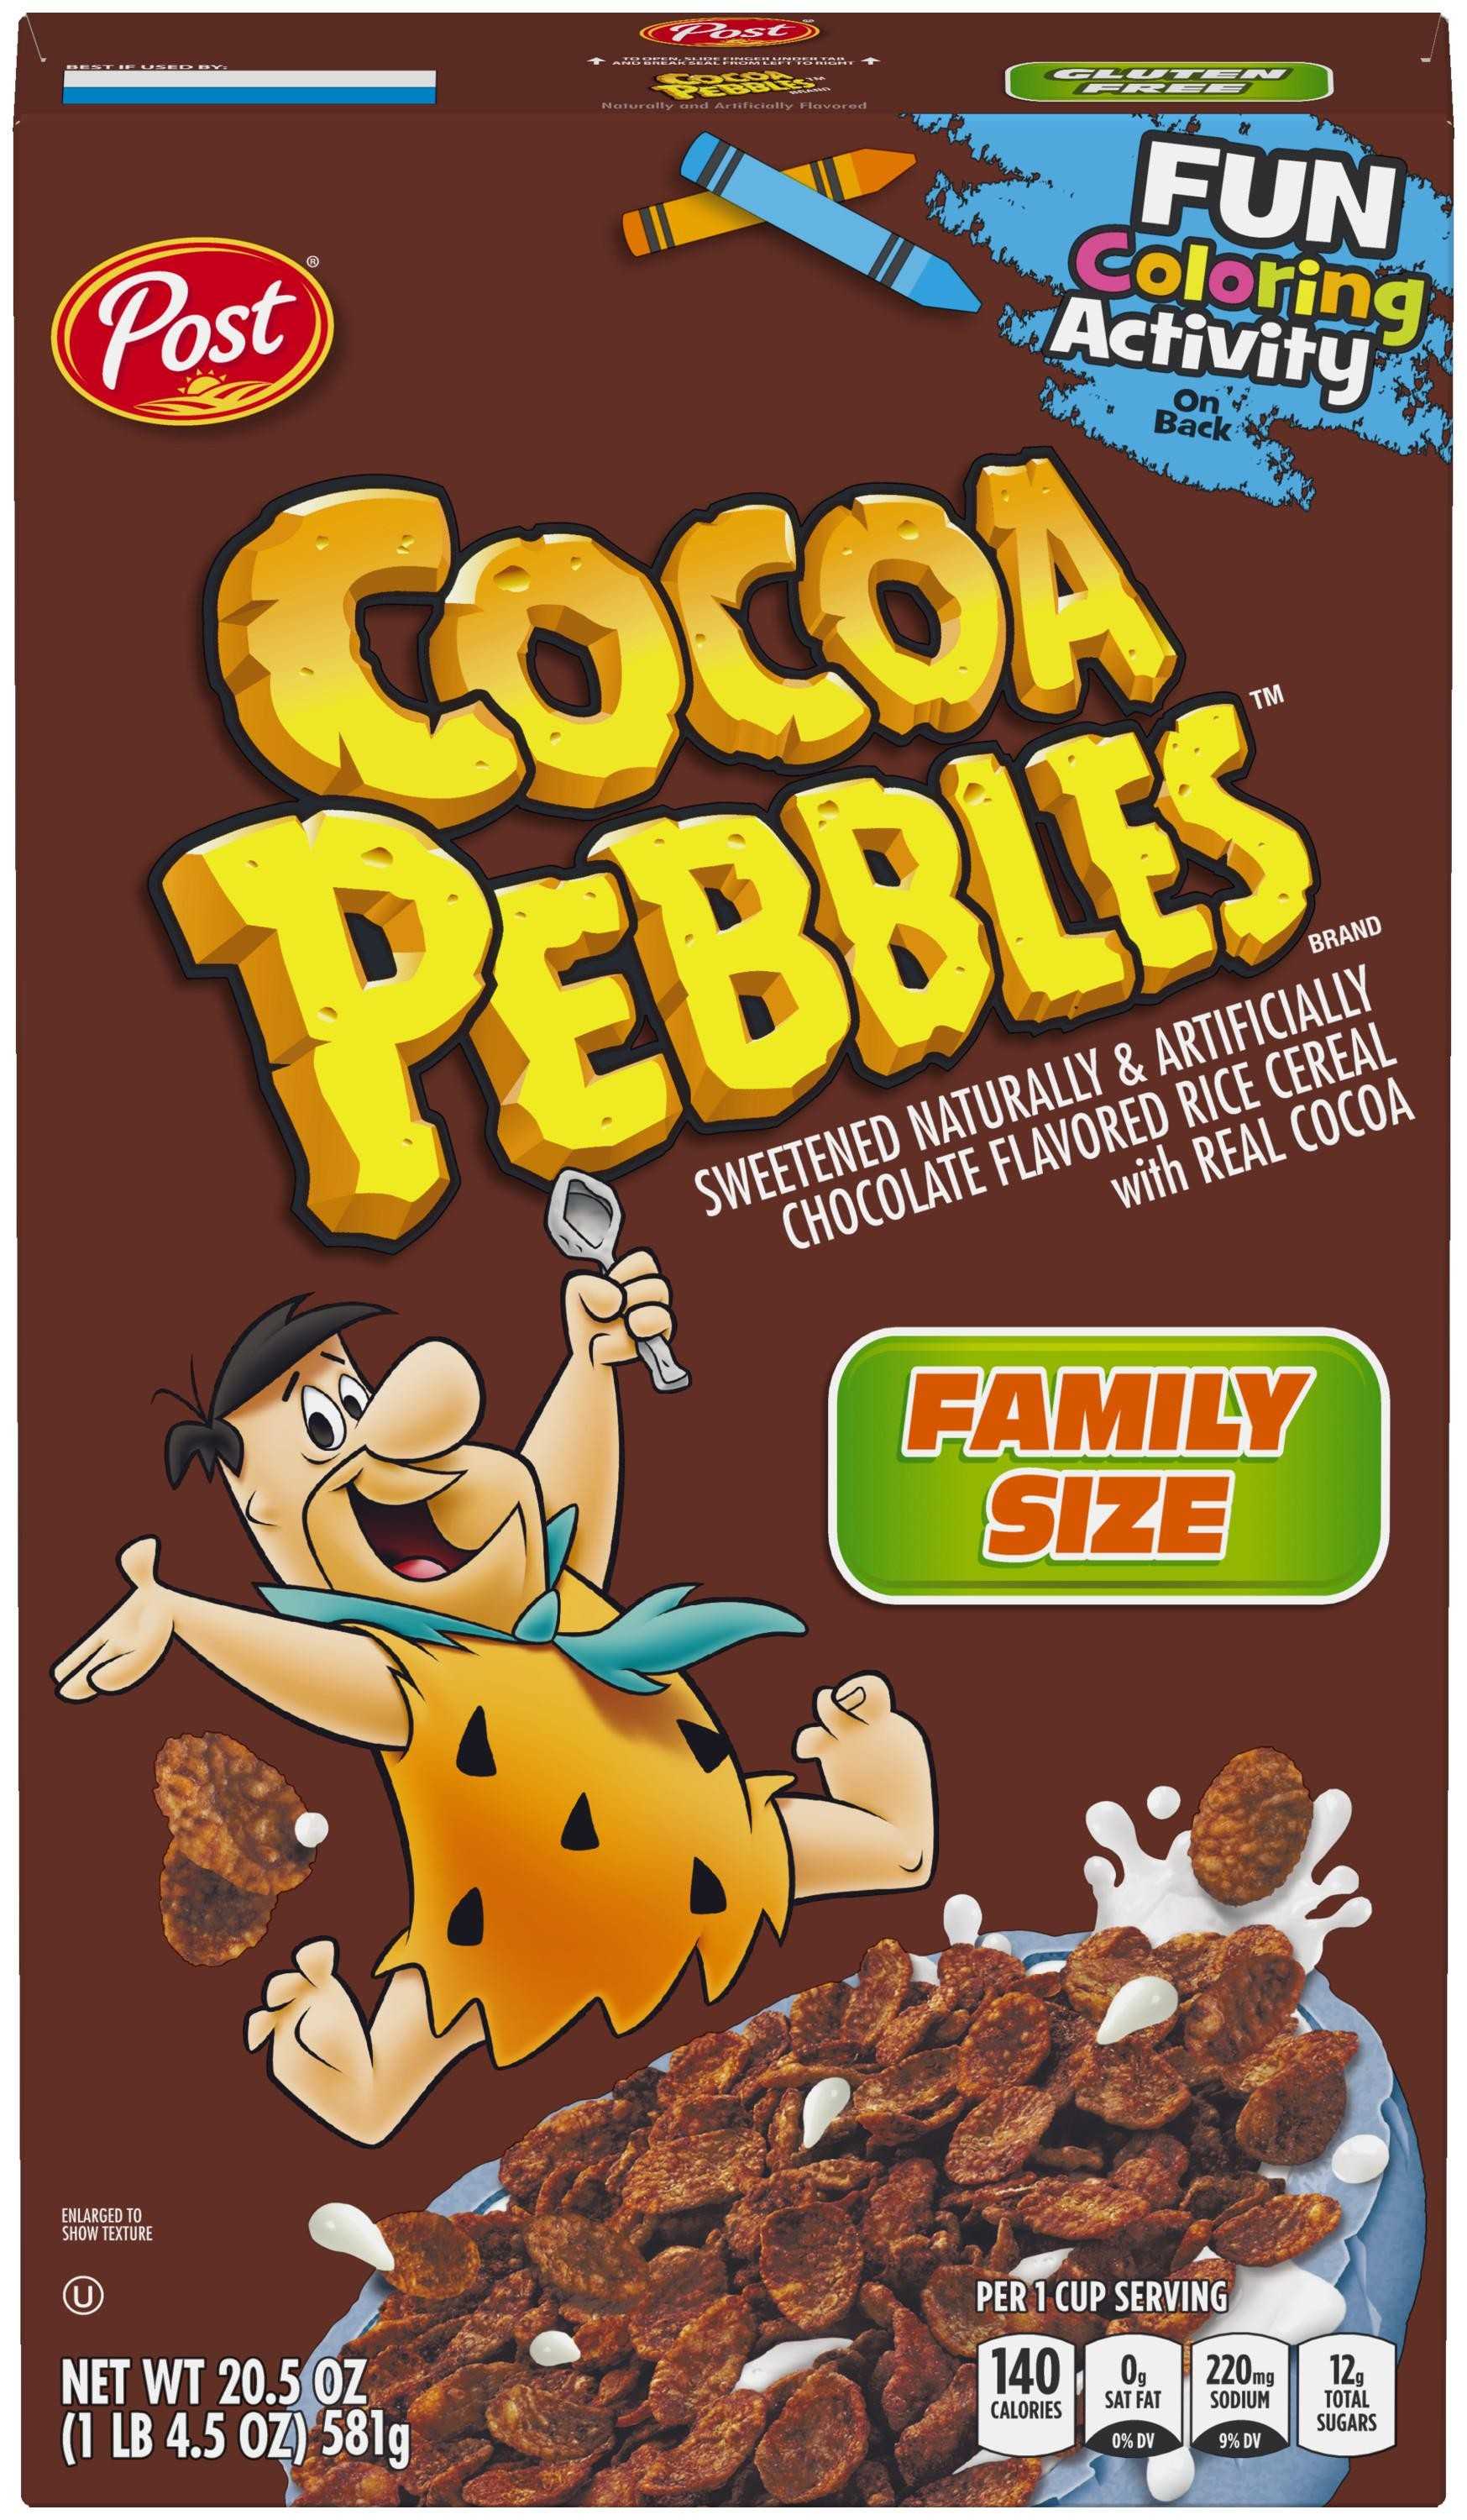 Post, Cocoa Pebbles Breakfast Cereal, Chocolate, Family Size, 20.5 oz. Box